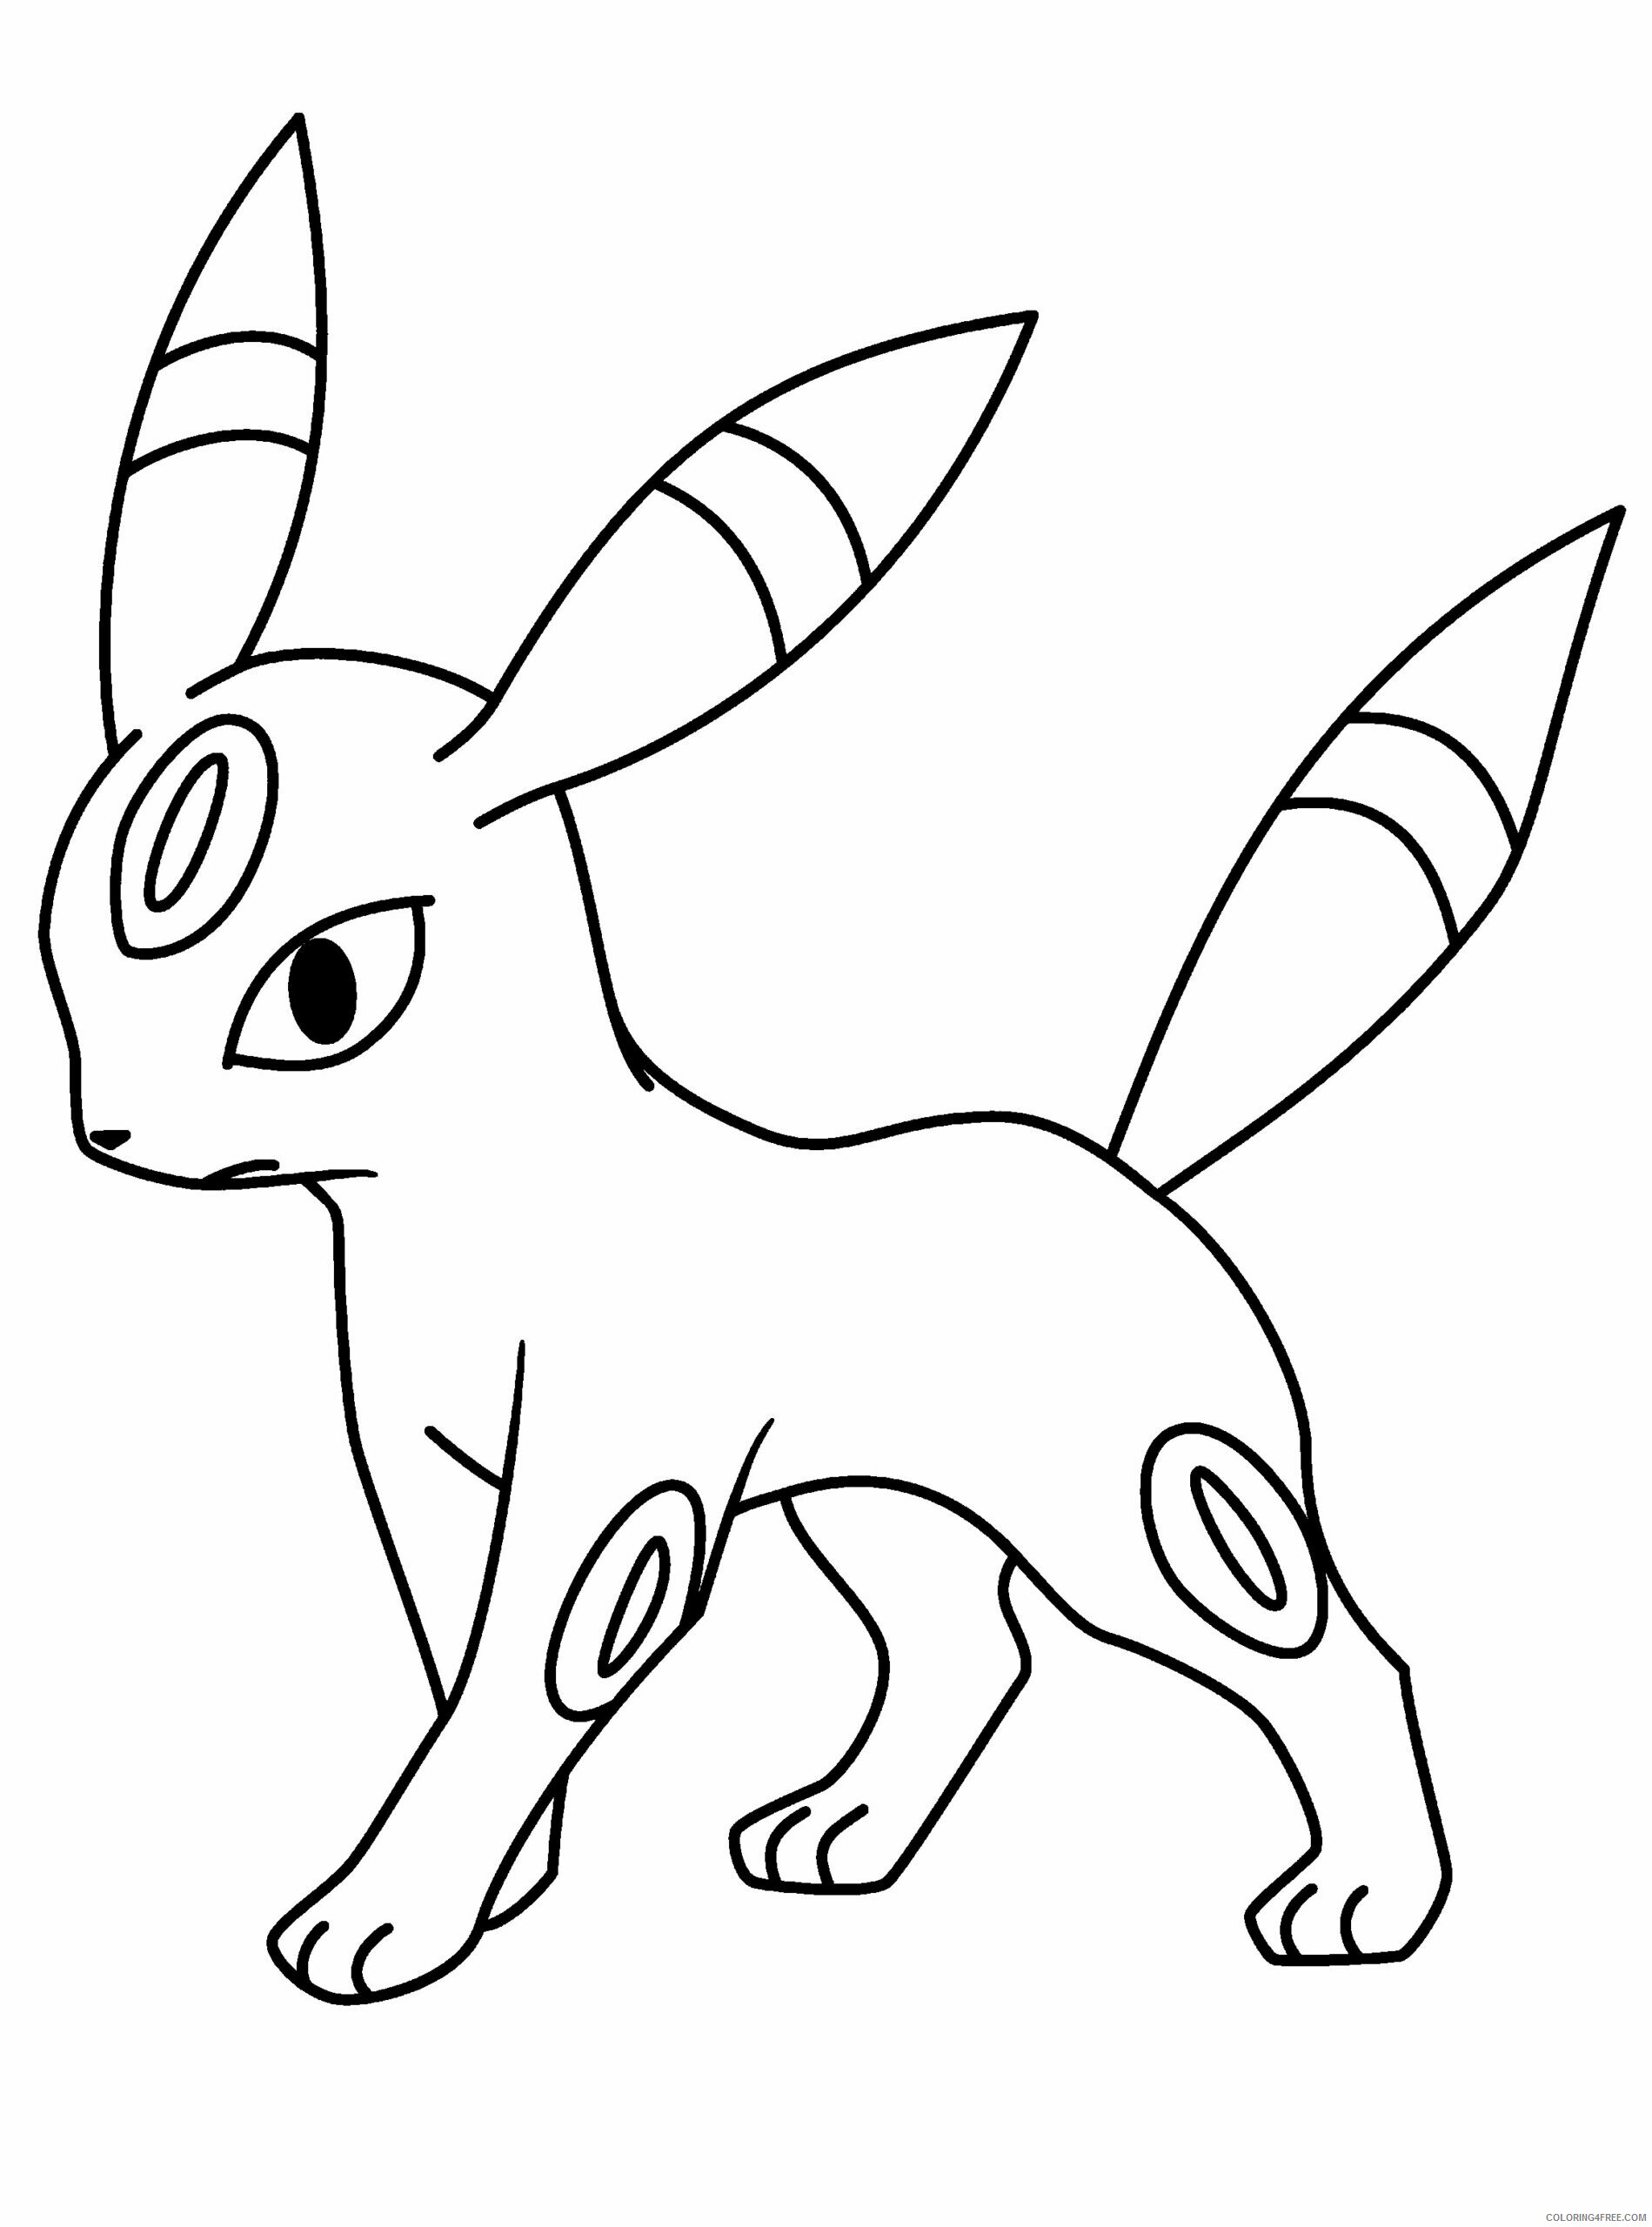 Pokemon Printable Coloring Pages Anime modest pokemon sheets best gallery design ideas 2021 064 Coloring4free